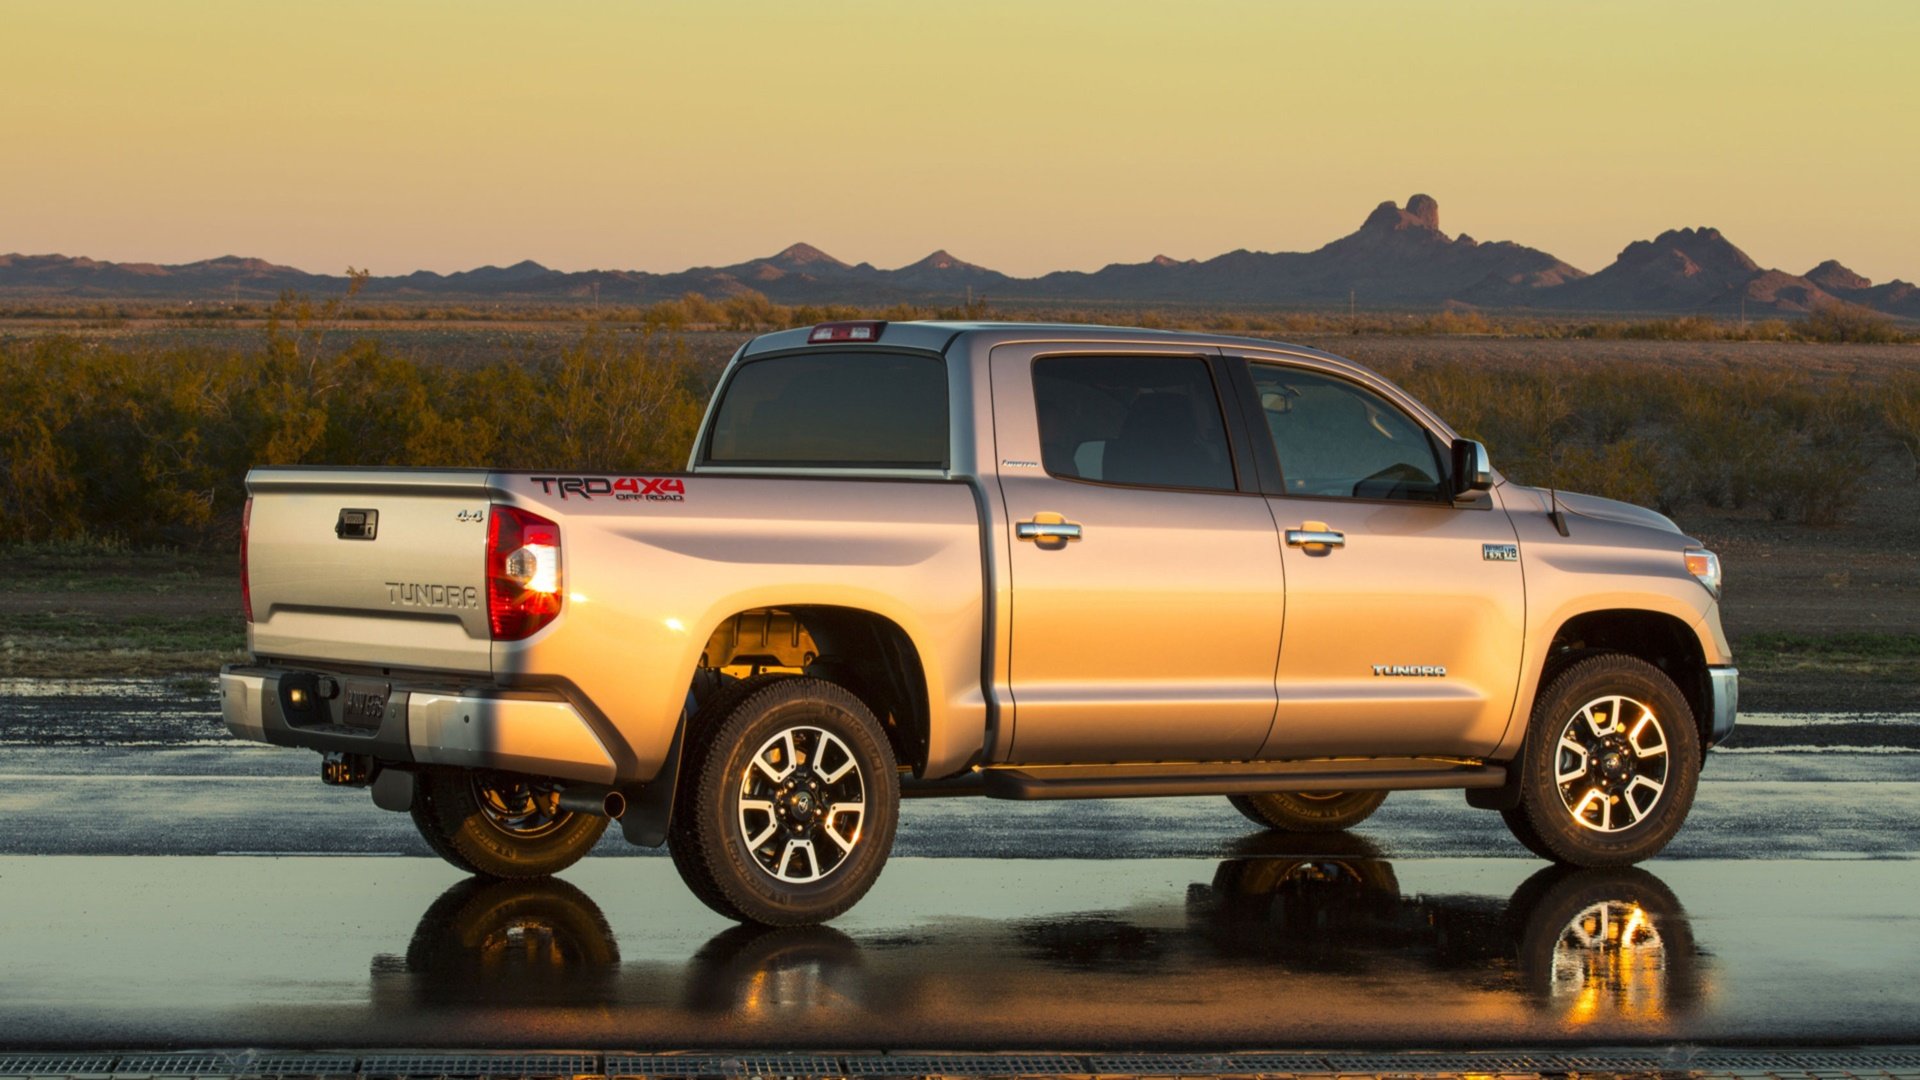 Toyota Tundra Wallpapers Hd For Desktop Backgrounds